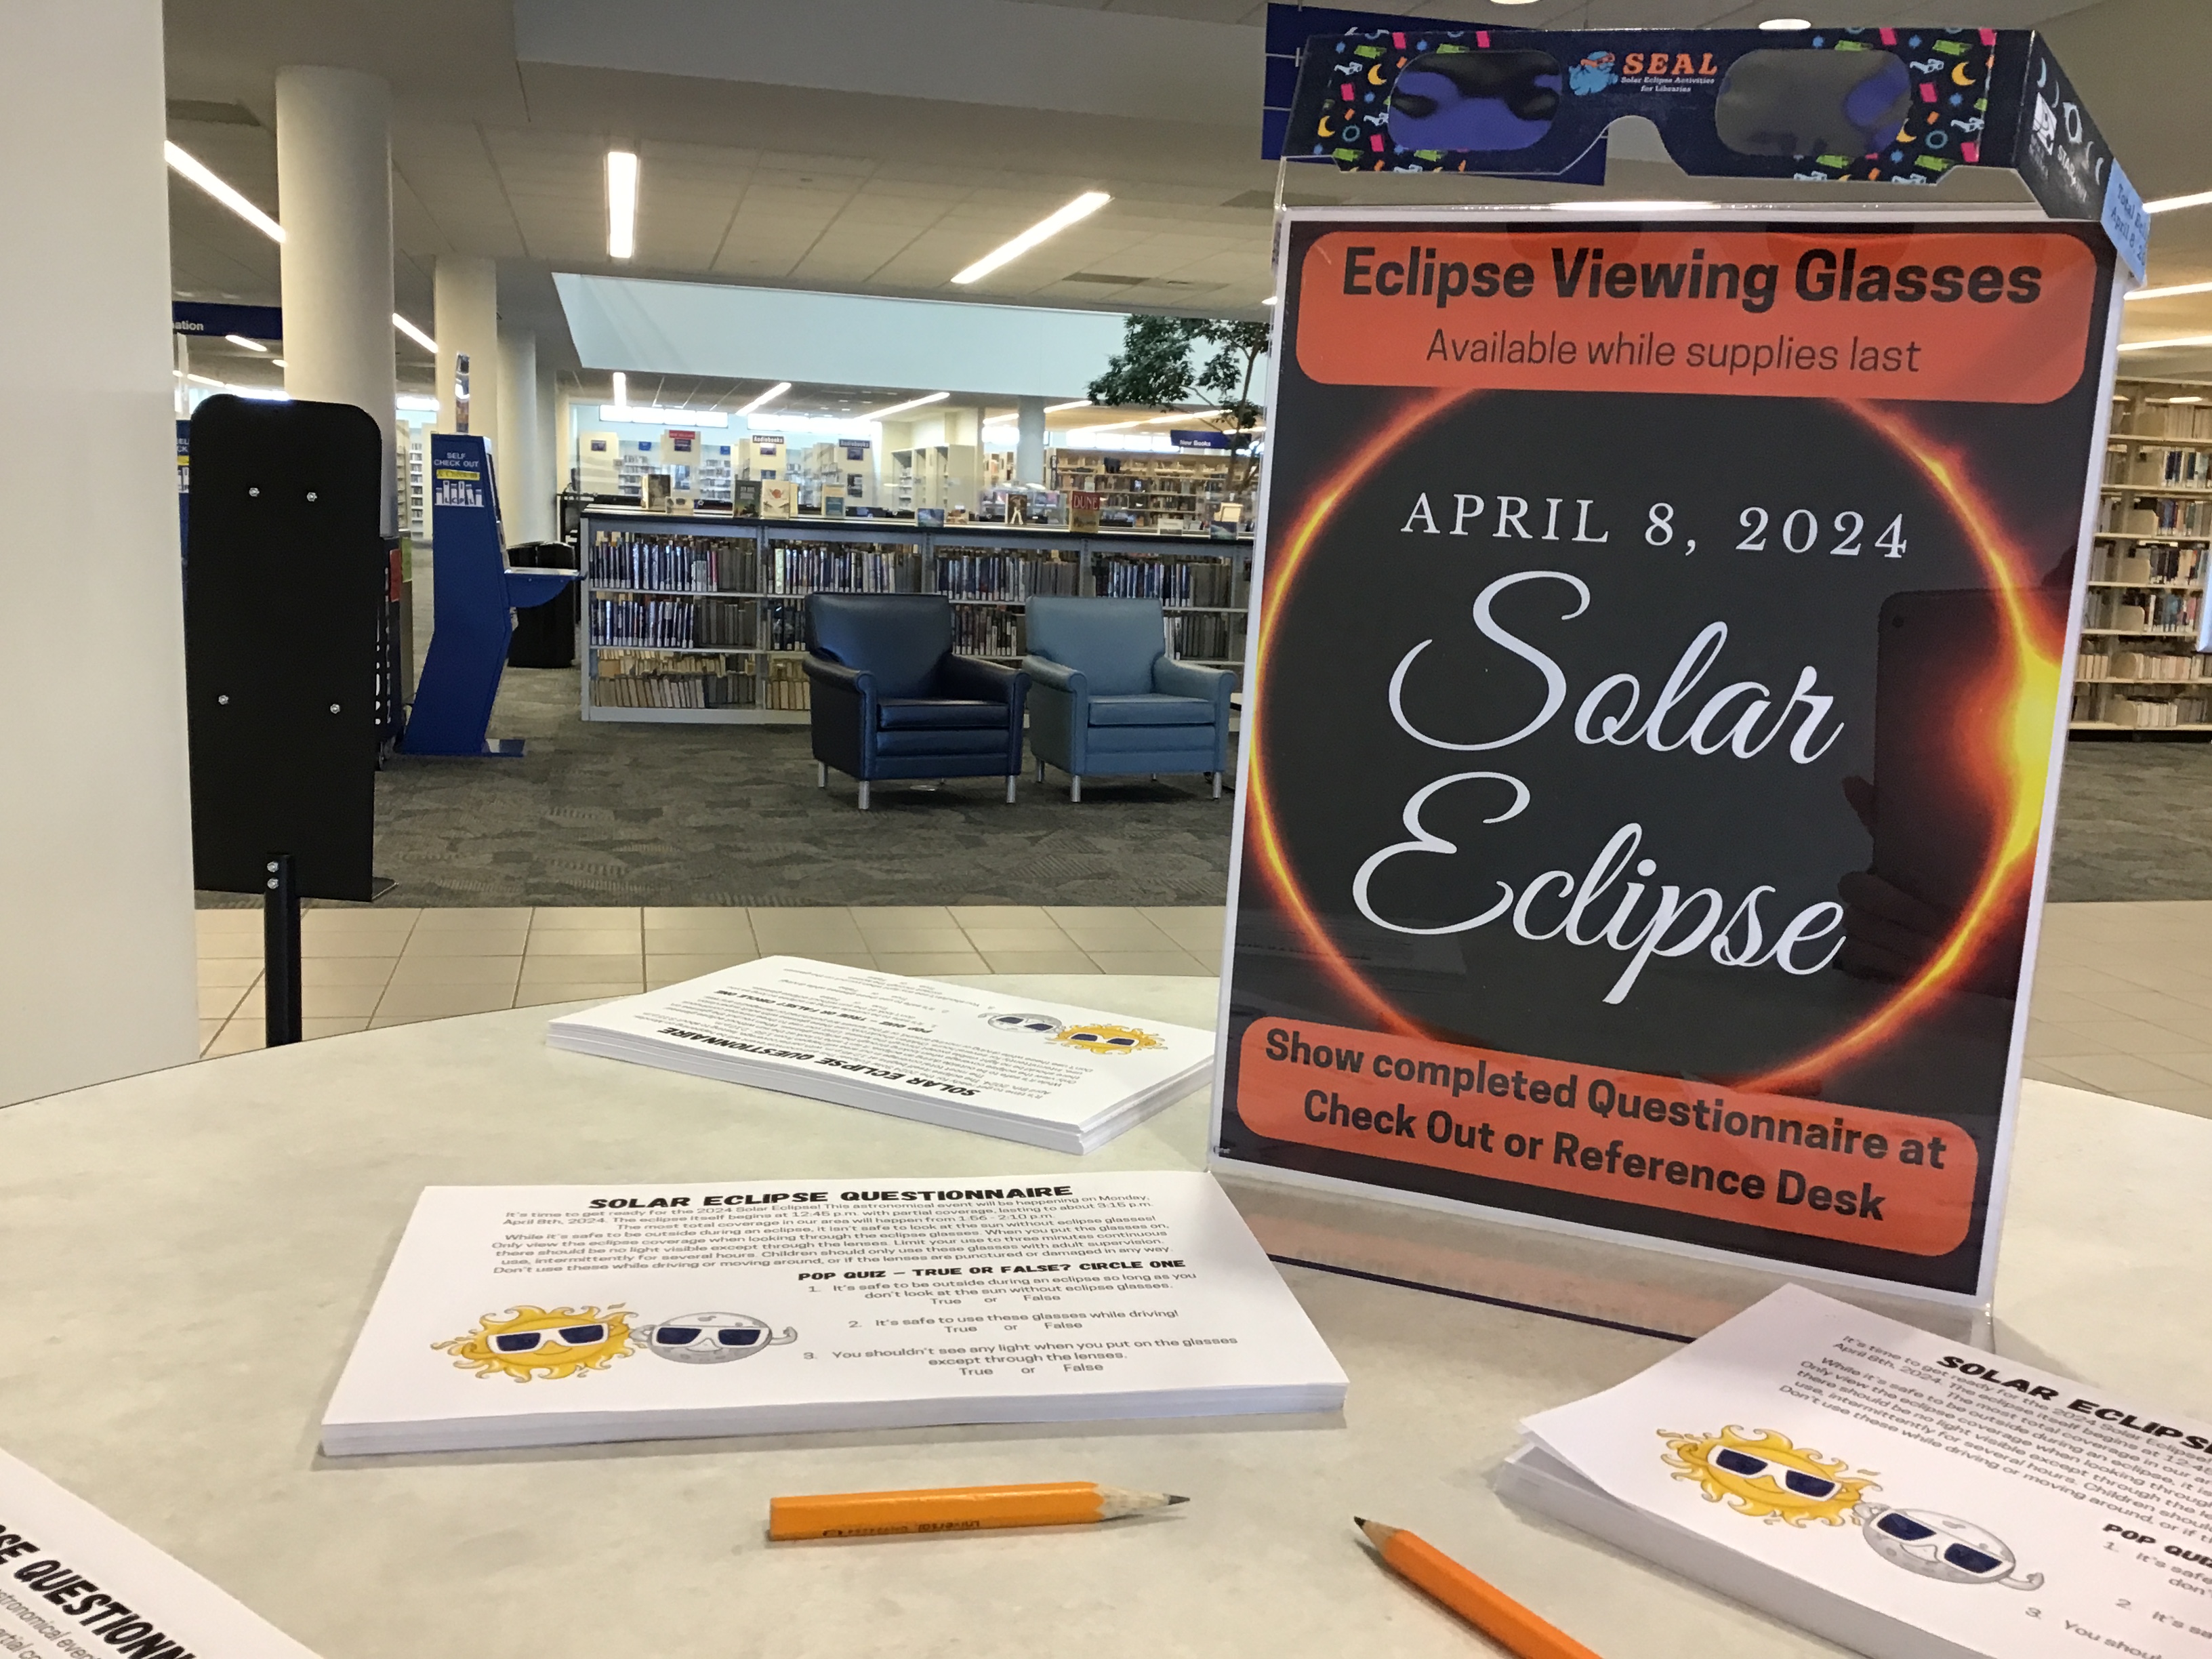 Eclipse glasses atop a sign reading Solar Eclipse. Show completed questionnaire at desk